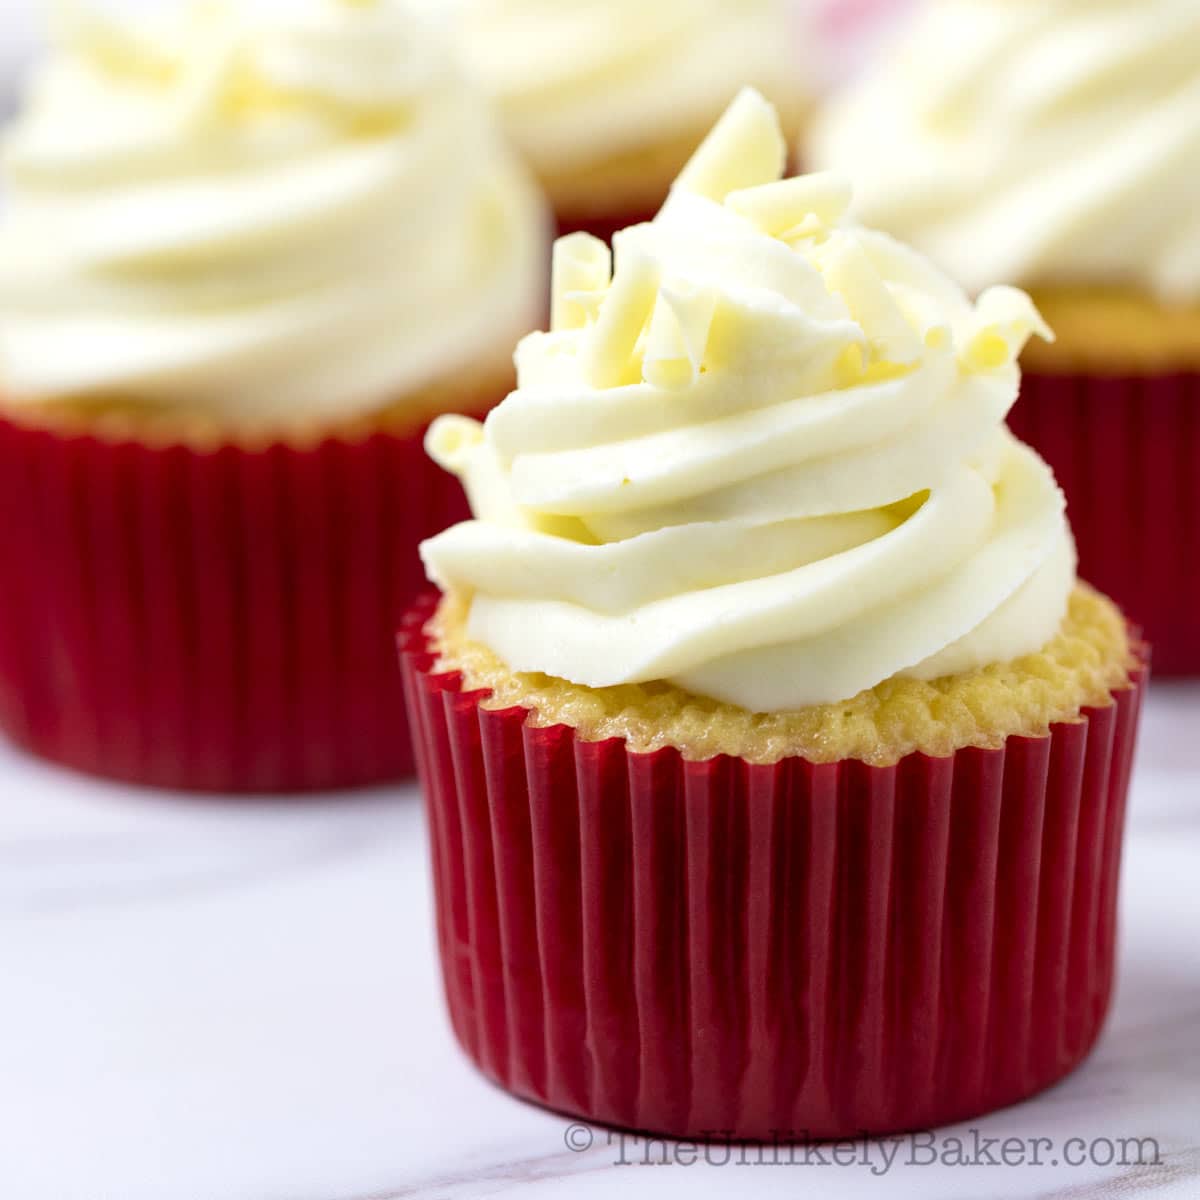 https://theunlikelybaker.com/wp-content/uploads/2021/12/White-Chocolate-Cupcakes-with-Raspberry-Filling-Feature.jpg